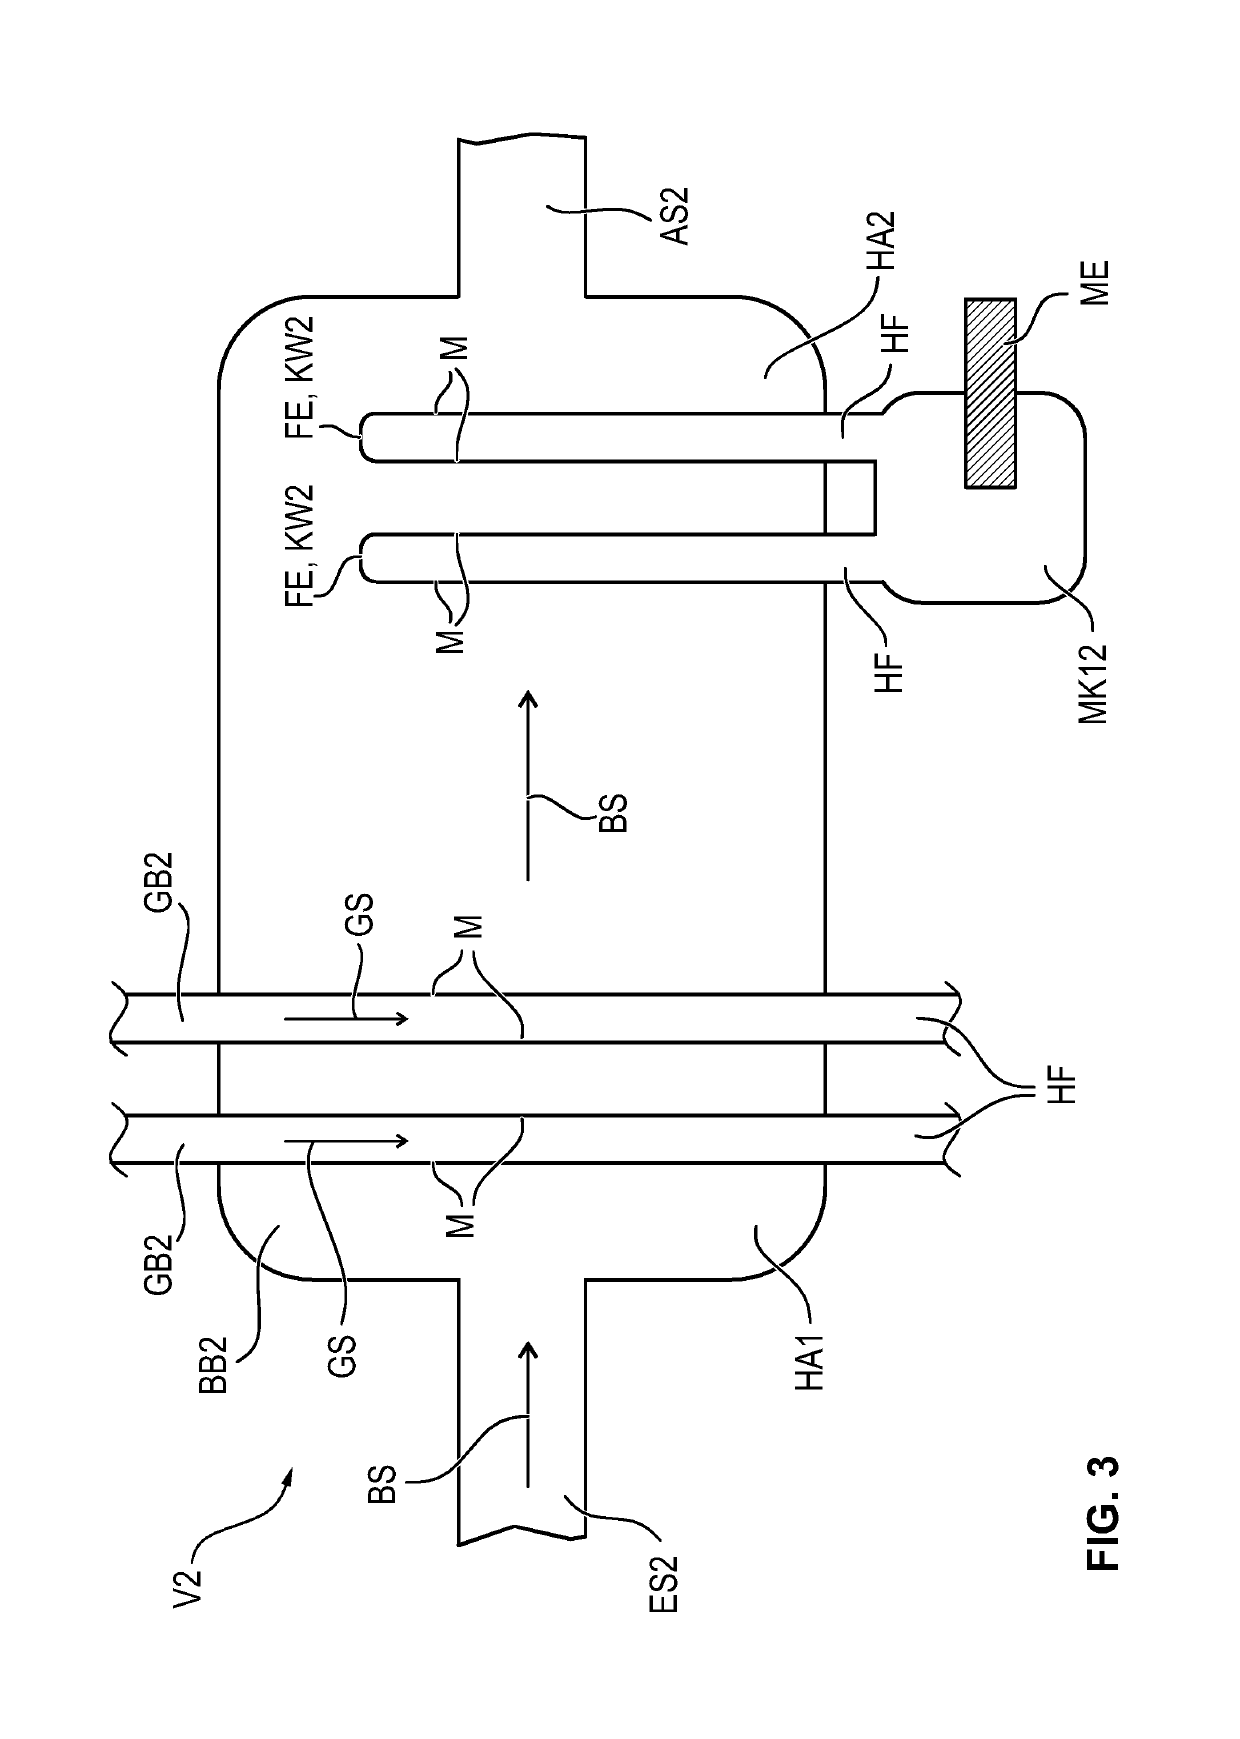 Extracorporeal blood gas exchange device